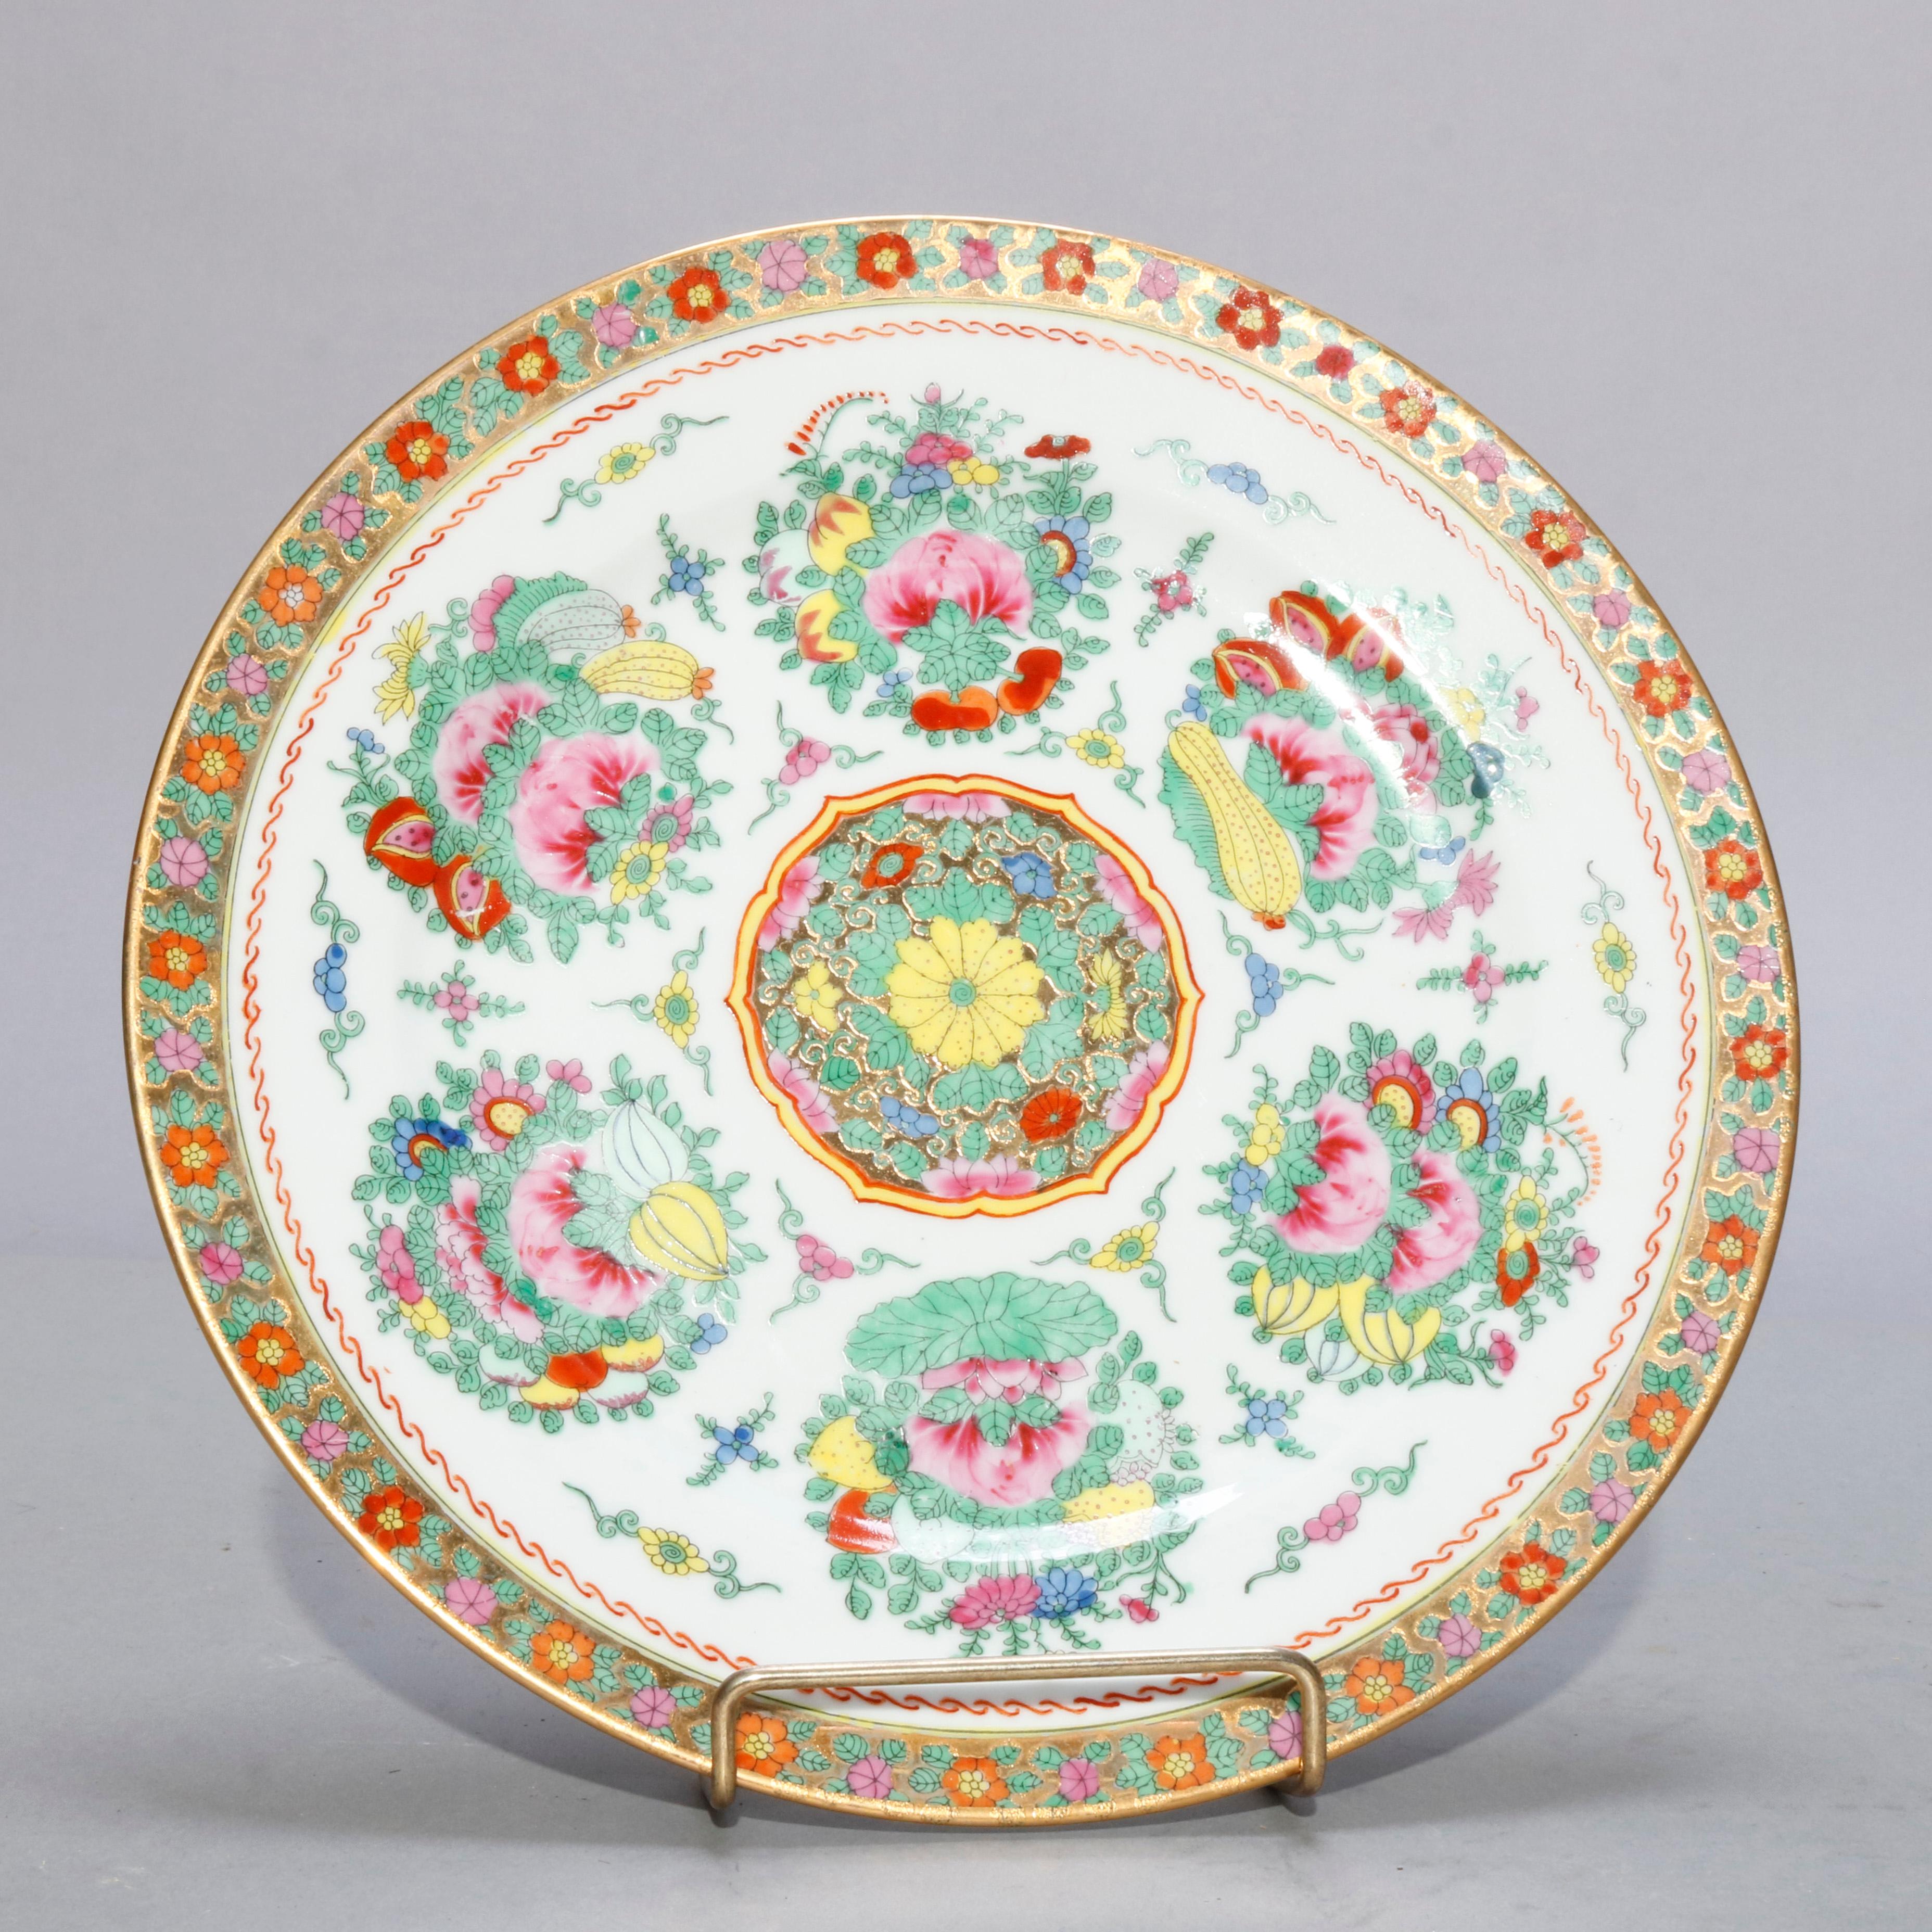 A pair of Chinese porcelain plates offer central floral medallion surrounded by floral reserves, gilt highlighting throughout, en verso maker stamp, 20th century

Measures- 1